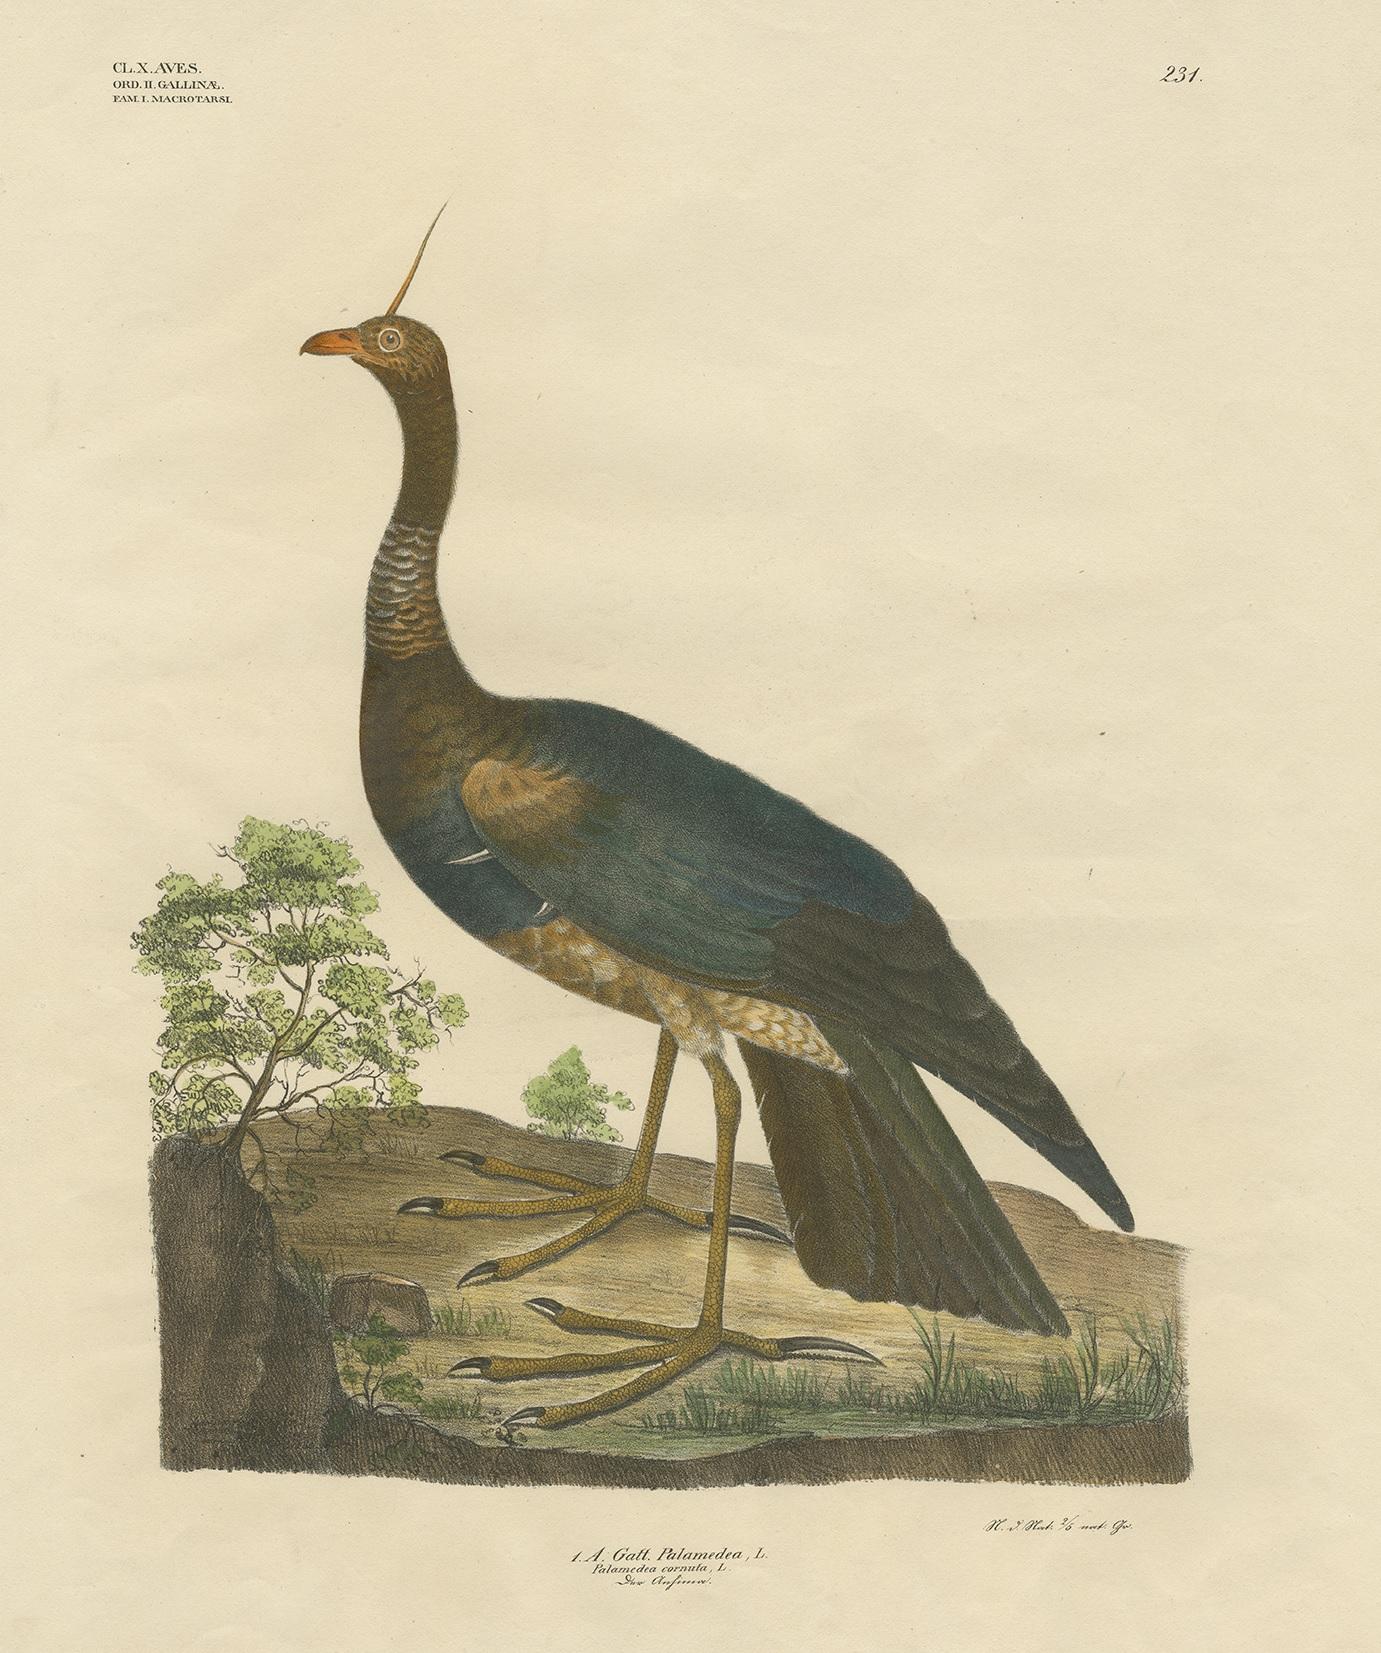 Antique bird print titled 'Gatt Palamedea'. Large lithograph of the horned screamer, a member of a small family of birds, the Anhimidae, which occurs in wetlands of tropical South America. There are three screamer species, the other two being the